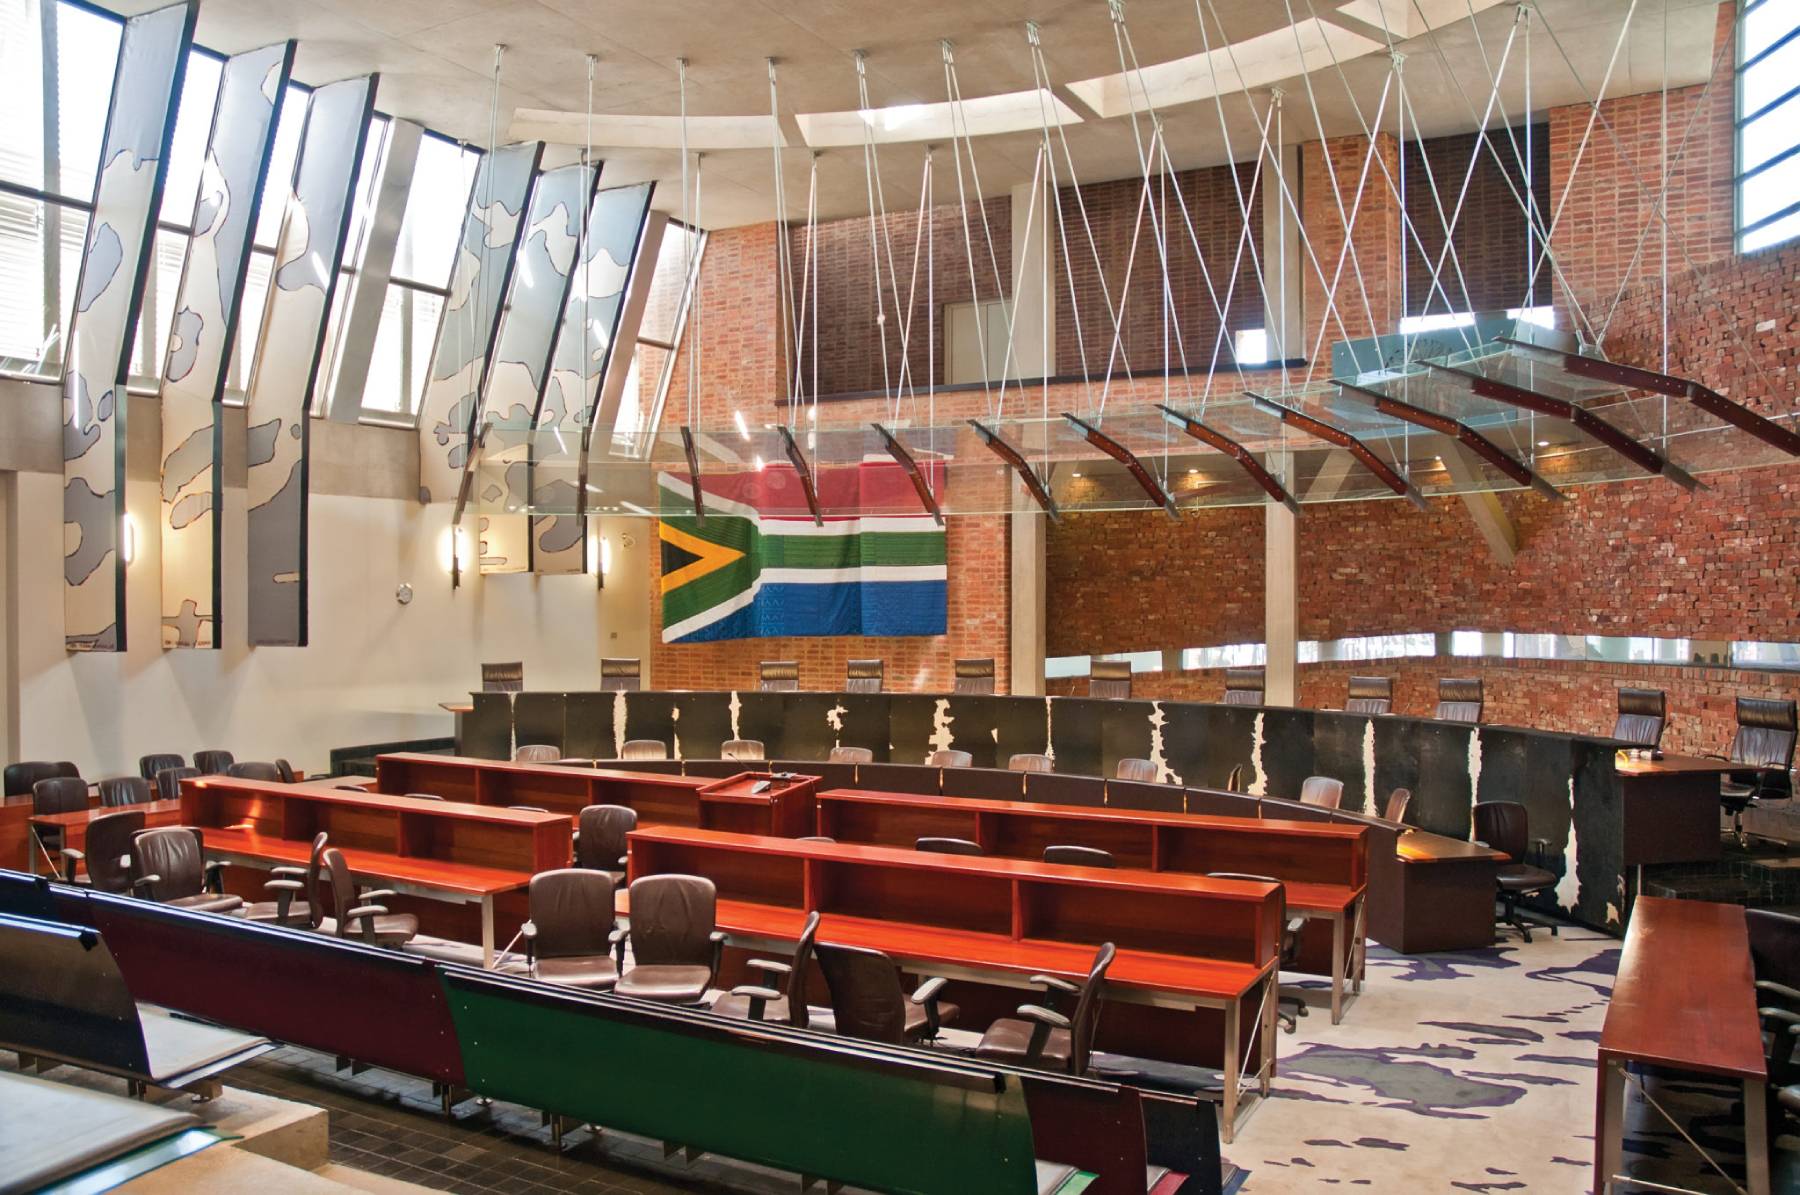 Constitutional Court - image sourced from www.groundup.org.za